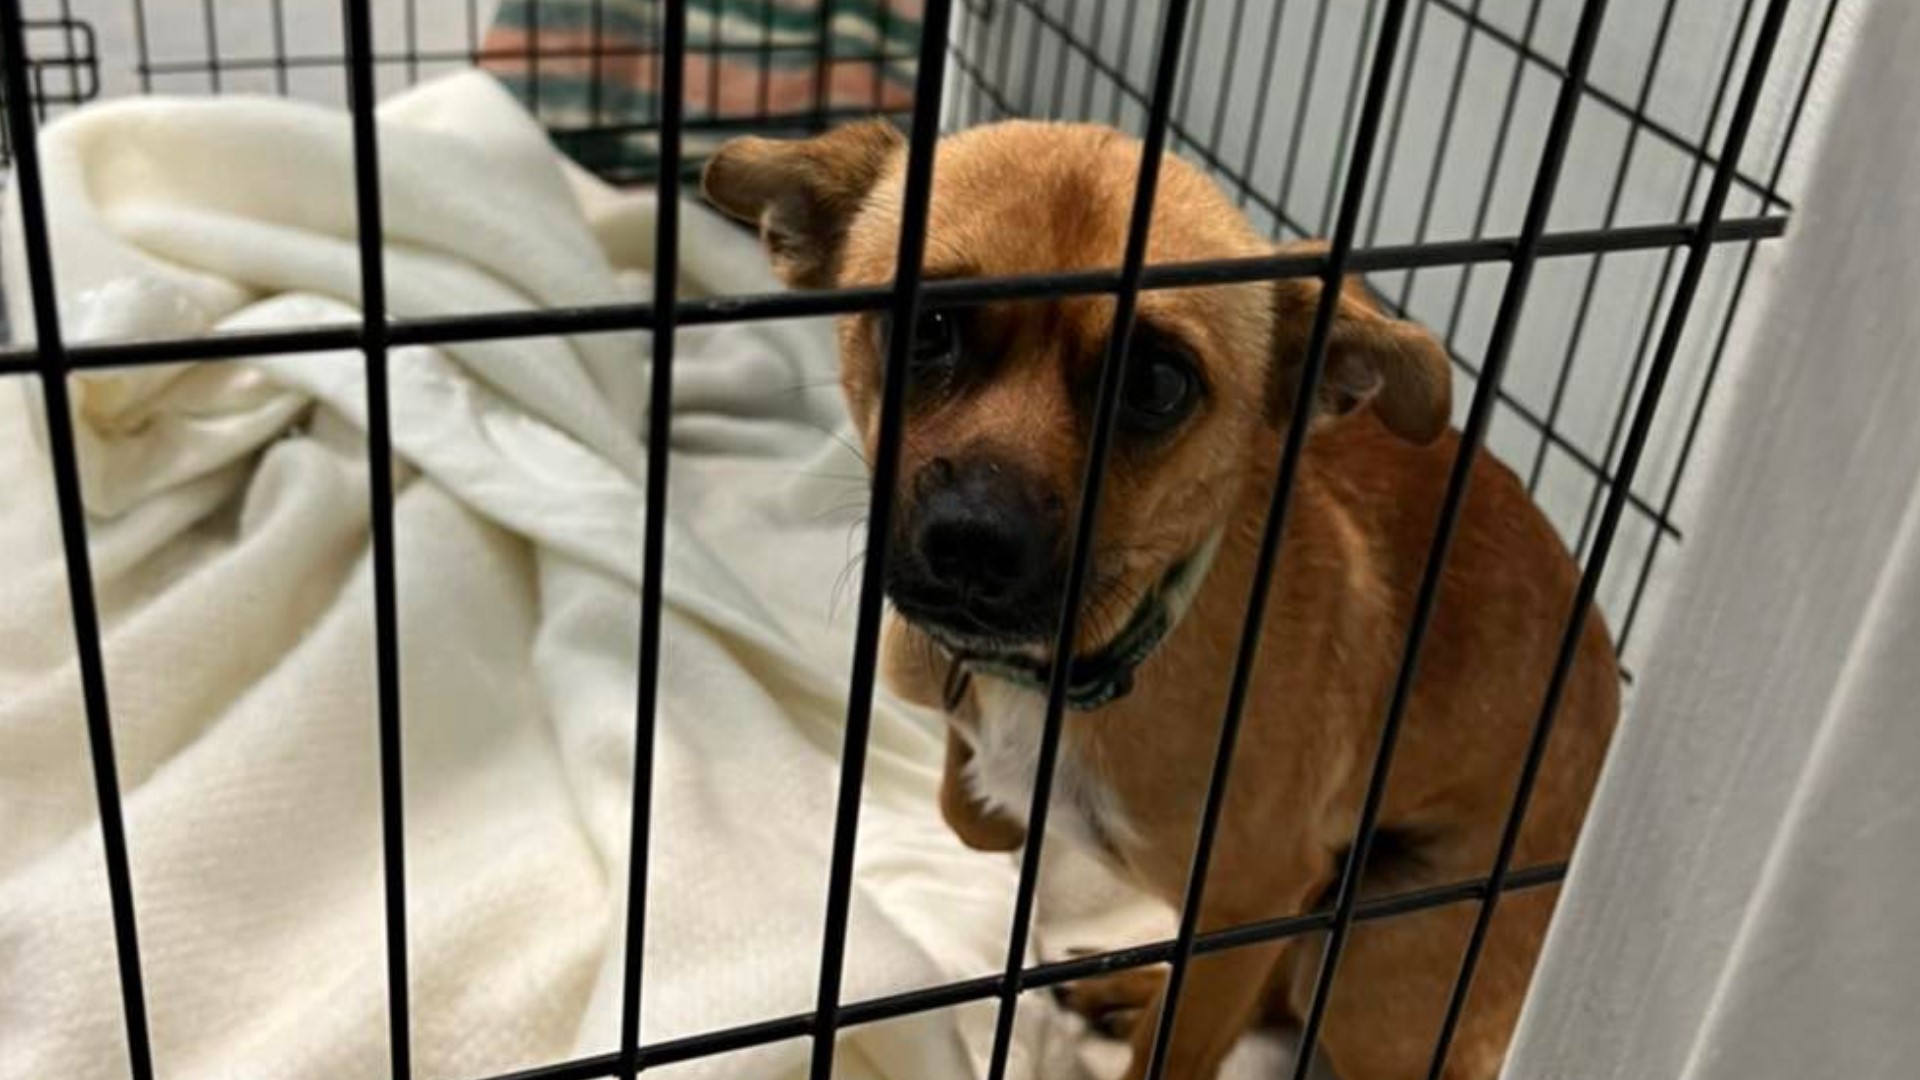 Last week the center said things "had never been this bad" after it had exceeded capacity, saying it took in more than 40 animals after the shelter was already full.